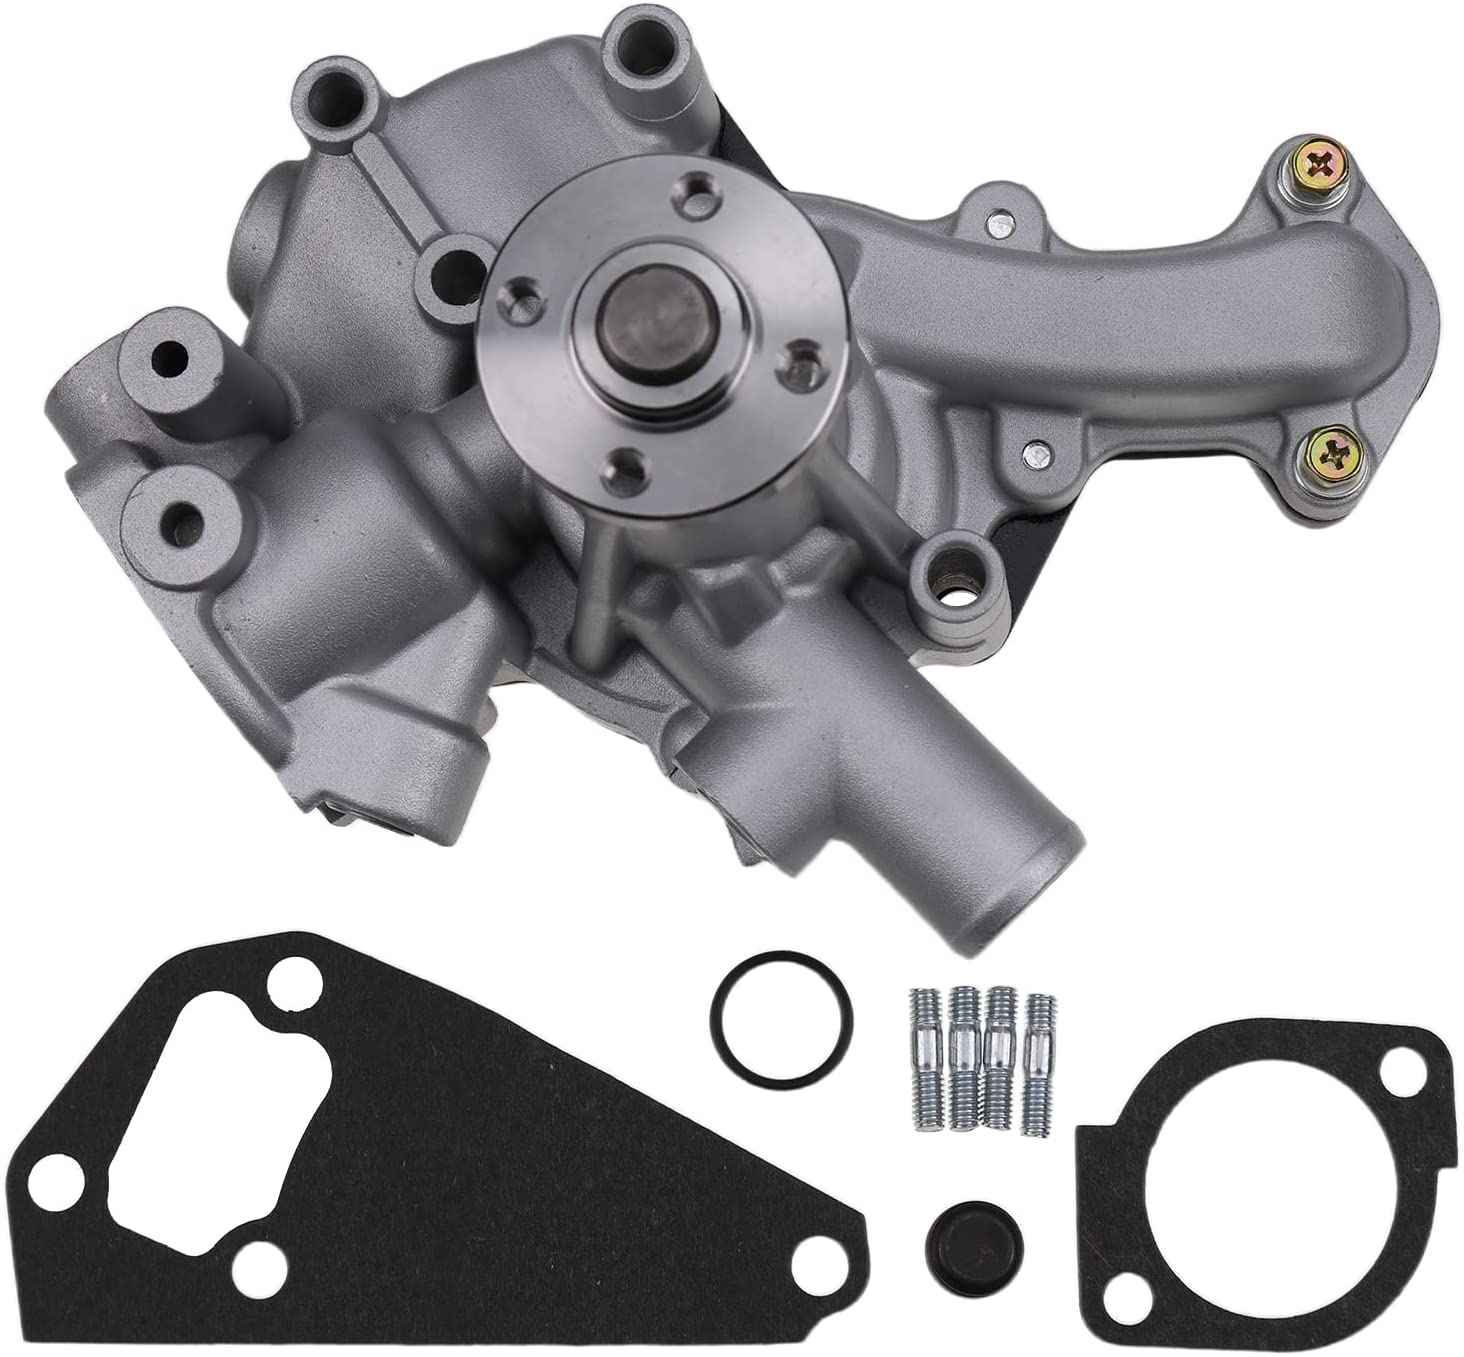 MIA880463 AM881505 AM881419 Water Pump with Gaskets for John Deere 110 Backhoe Loaders with 4TNE84-EJTLB Engine - KUDUPARTS